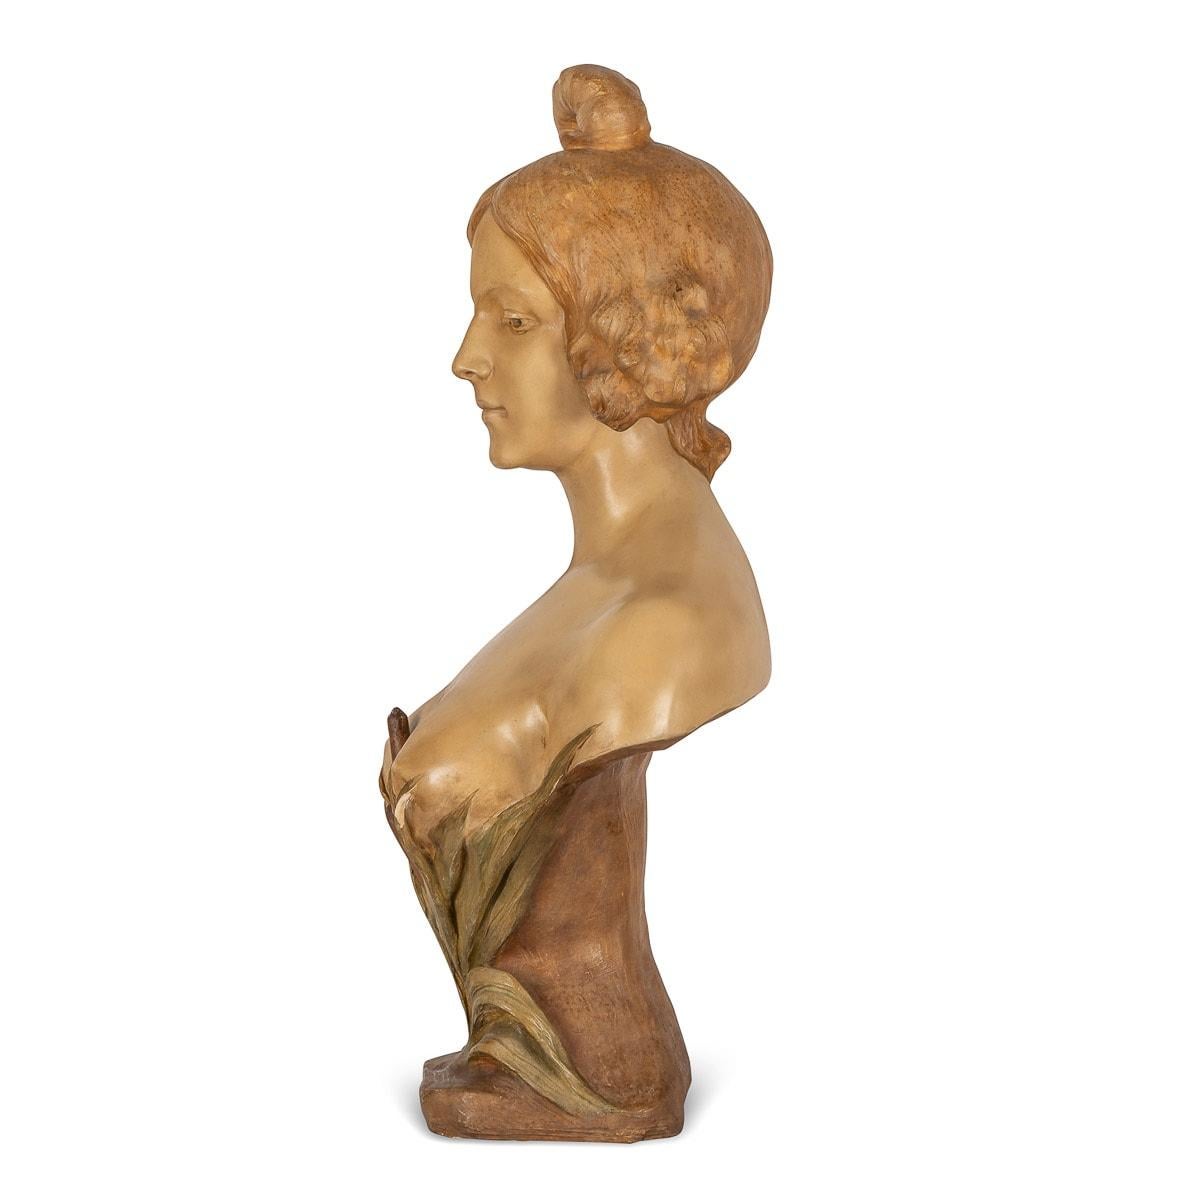 Antique early-20th Century French Art Nouveau terracotta sculpture of a female bust. This sculpture is beautifully made with fine detail and with a lovely patination. Signed by the Italian artist A.Gory (Affortunato Gory 1895-1930). Italian sculptor